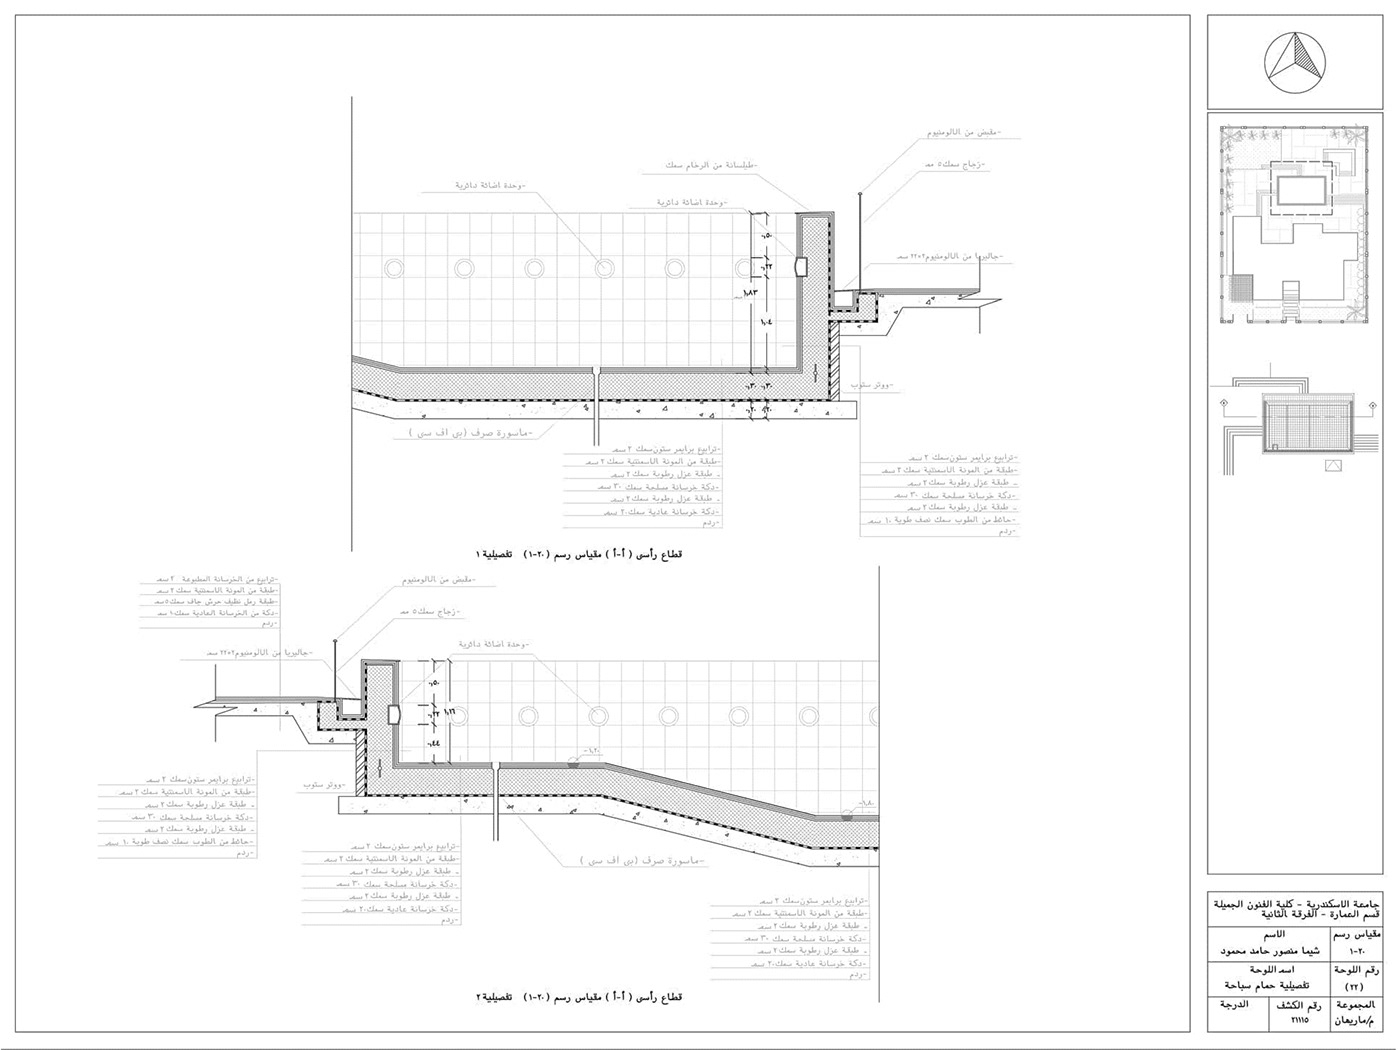 architecture shopdrawing Shopdrawings working drawings AutoCAD construction construction building detail details Working Details